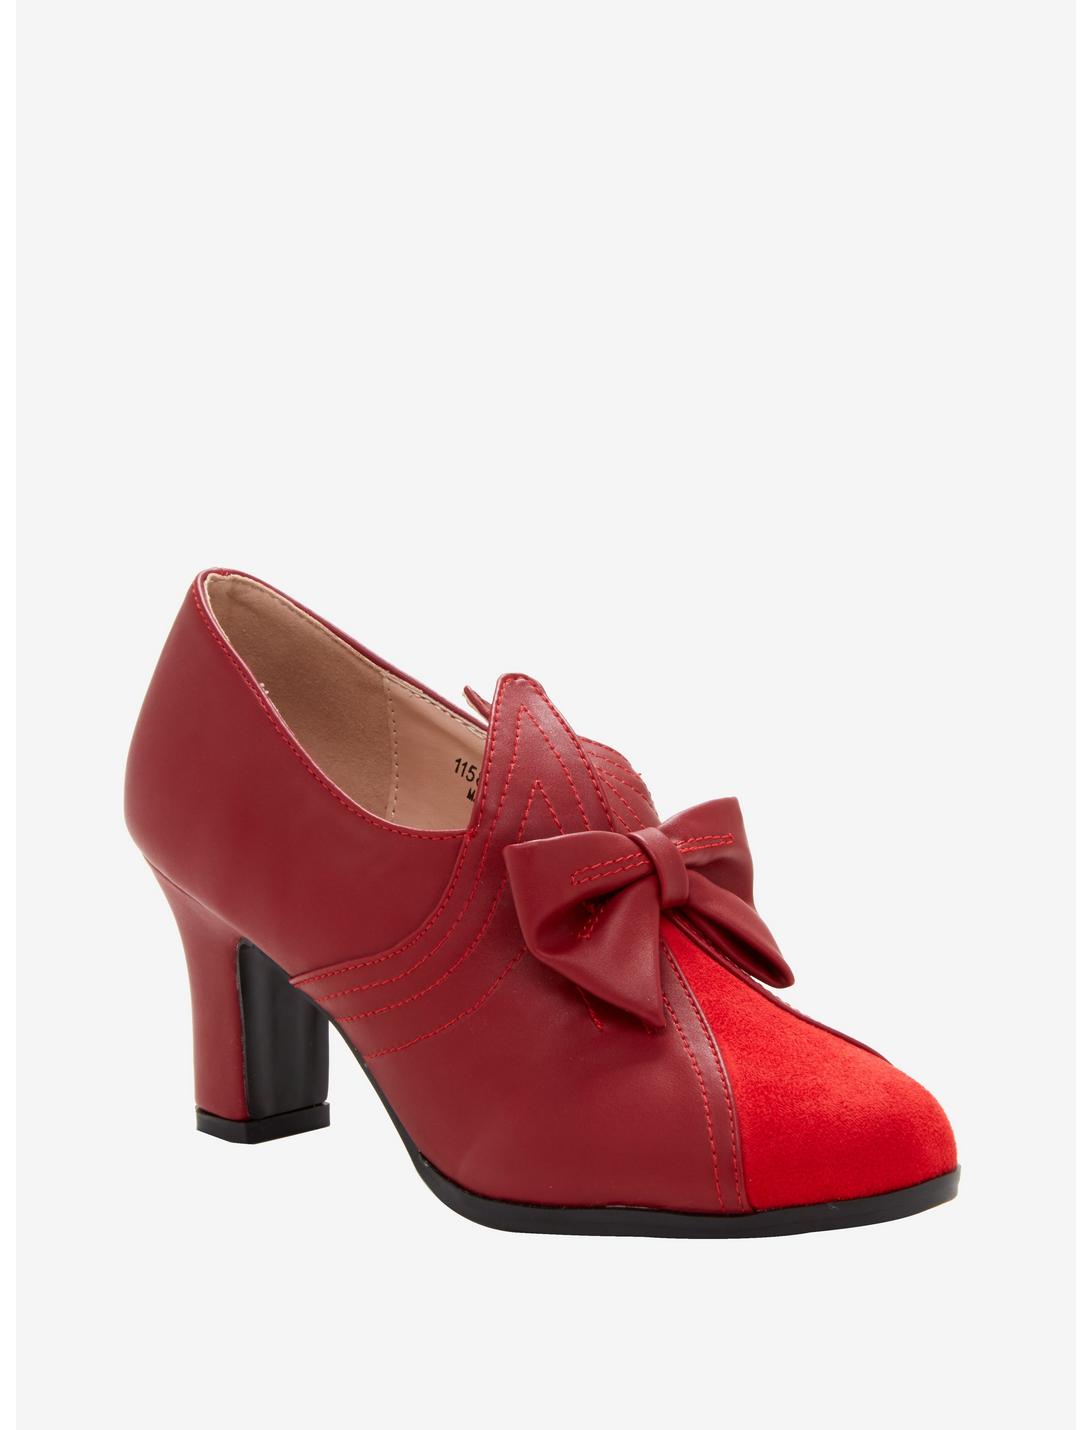 Disney Mary Poppins Returns Cosplay Heels, RED, hi-res